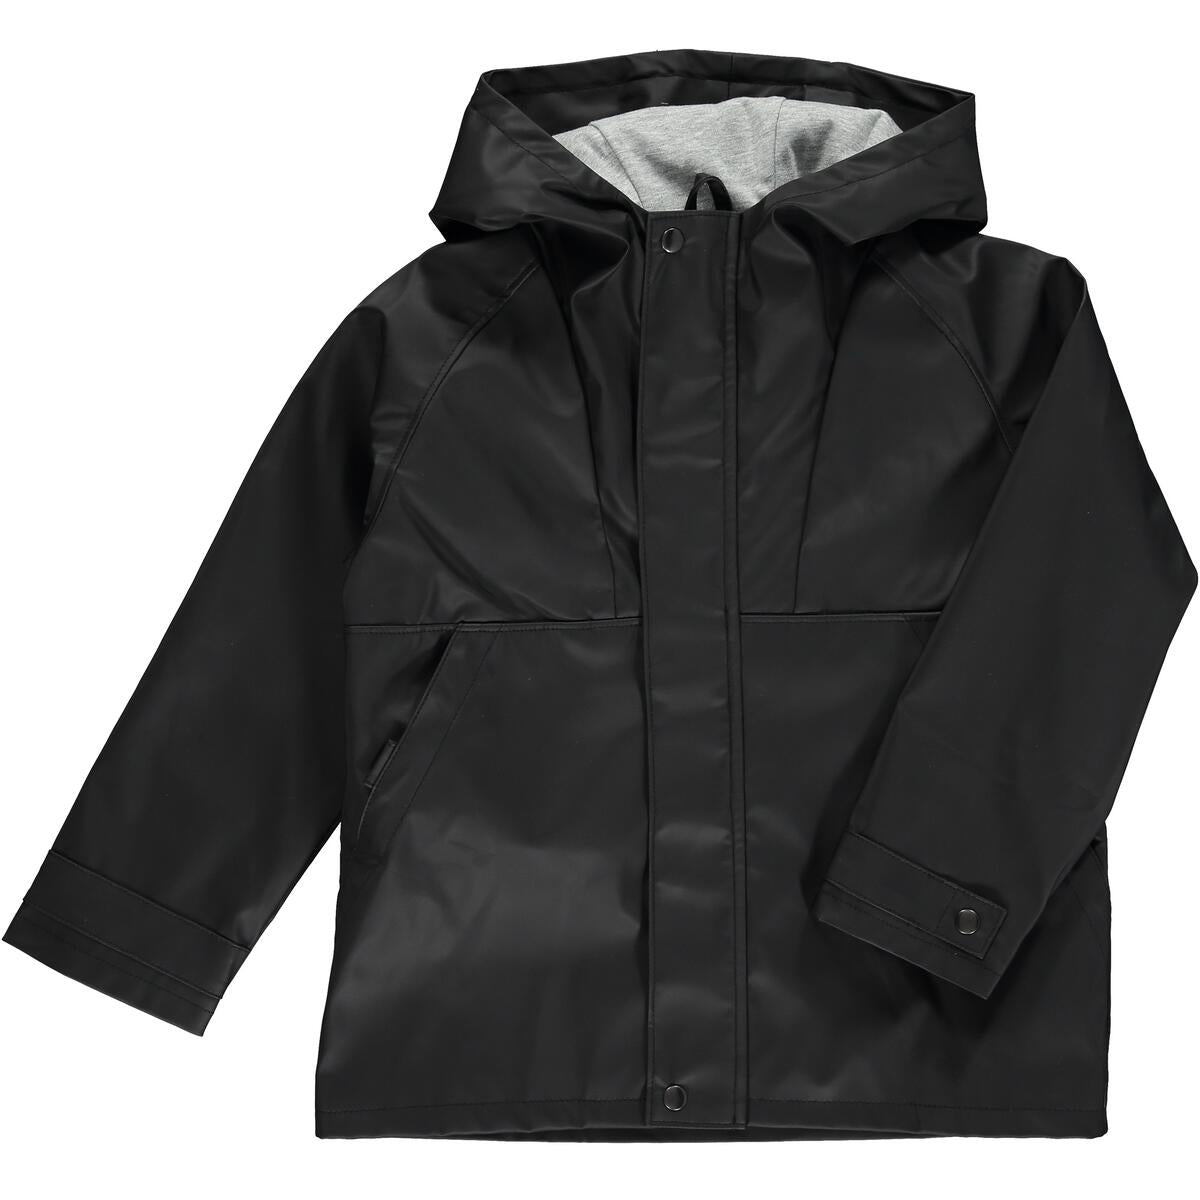 Stay cool and dry in our Black Splash Raincoat! Perfect on soggy days, this hooded raincoat is made with water-resistant cotton fabric and side pockets - it's got you covered ... literally.